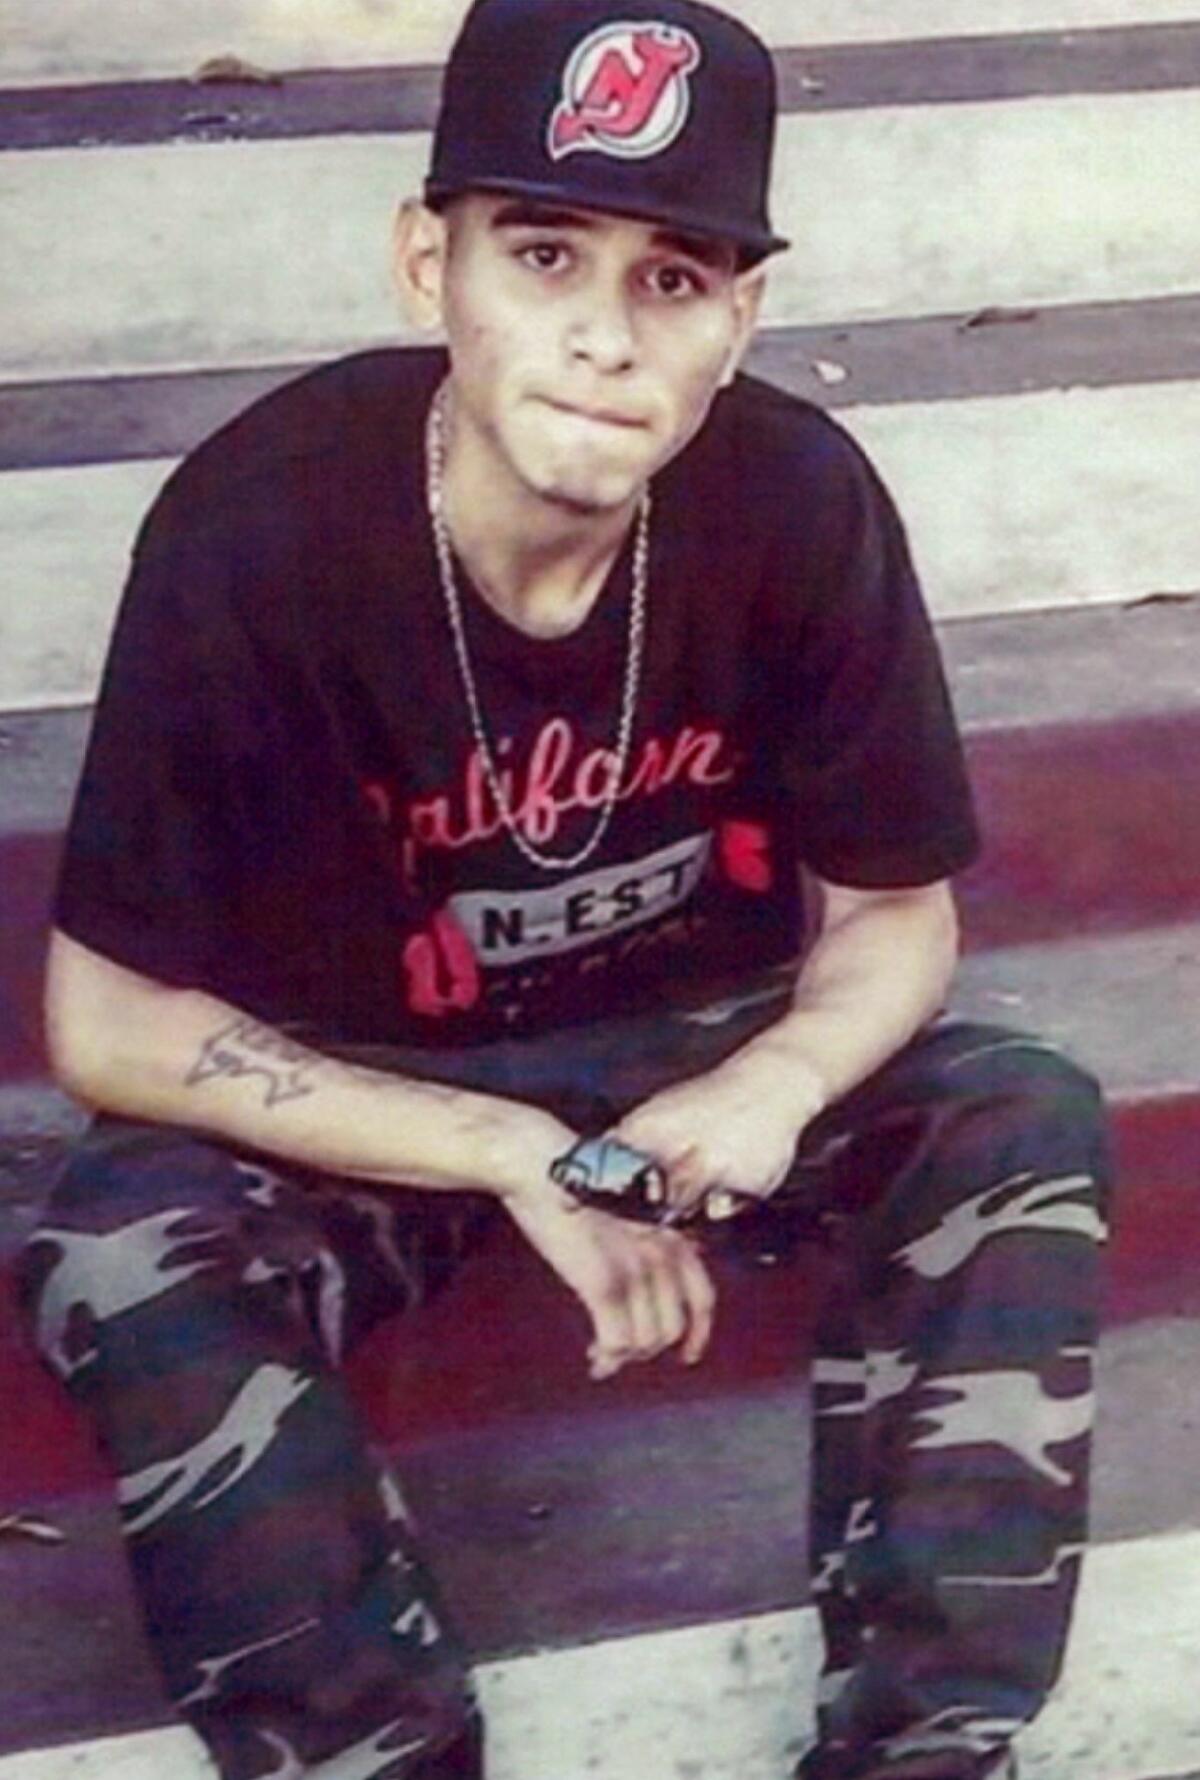 Carlos Rios seated on steps with camouflage pants, a black T-shirt and a New Jersey Devils baseball cap